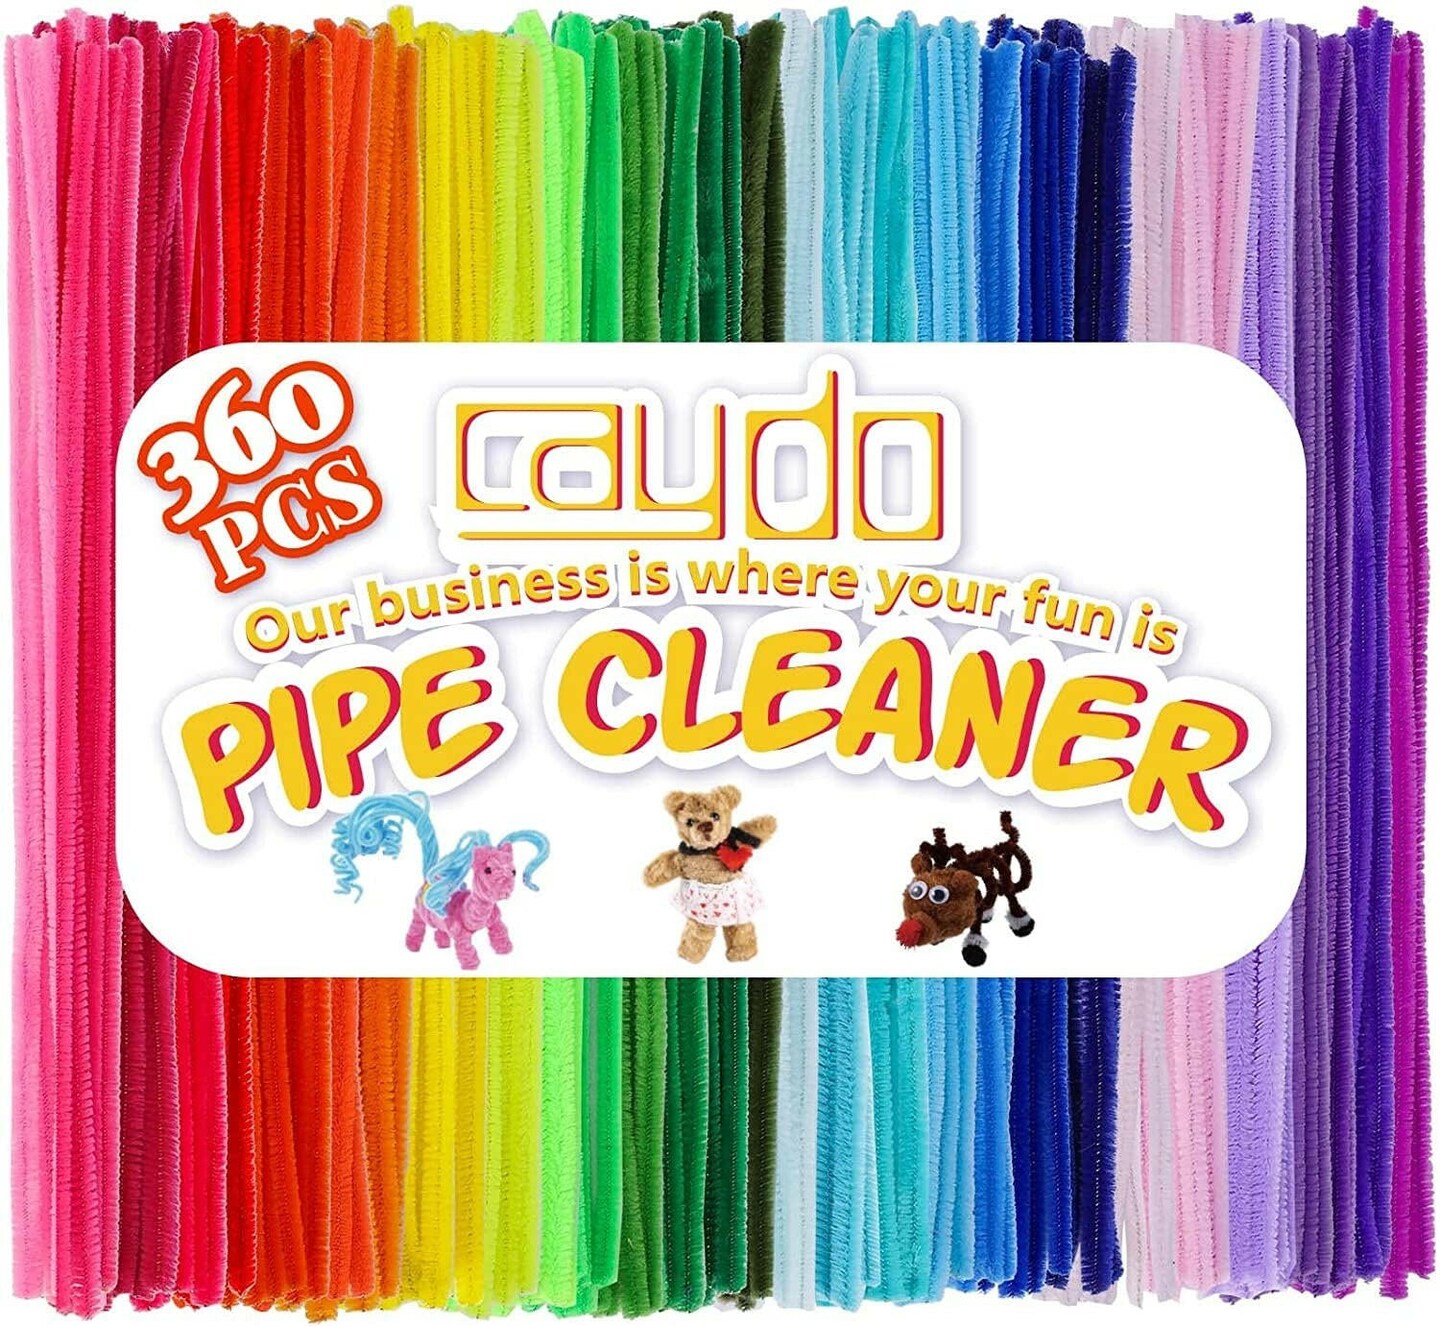 Pipe Cleaners, Pipe Cleaners Craft, Arts and Crafts, Crafts, Craft